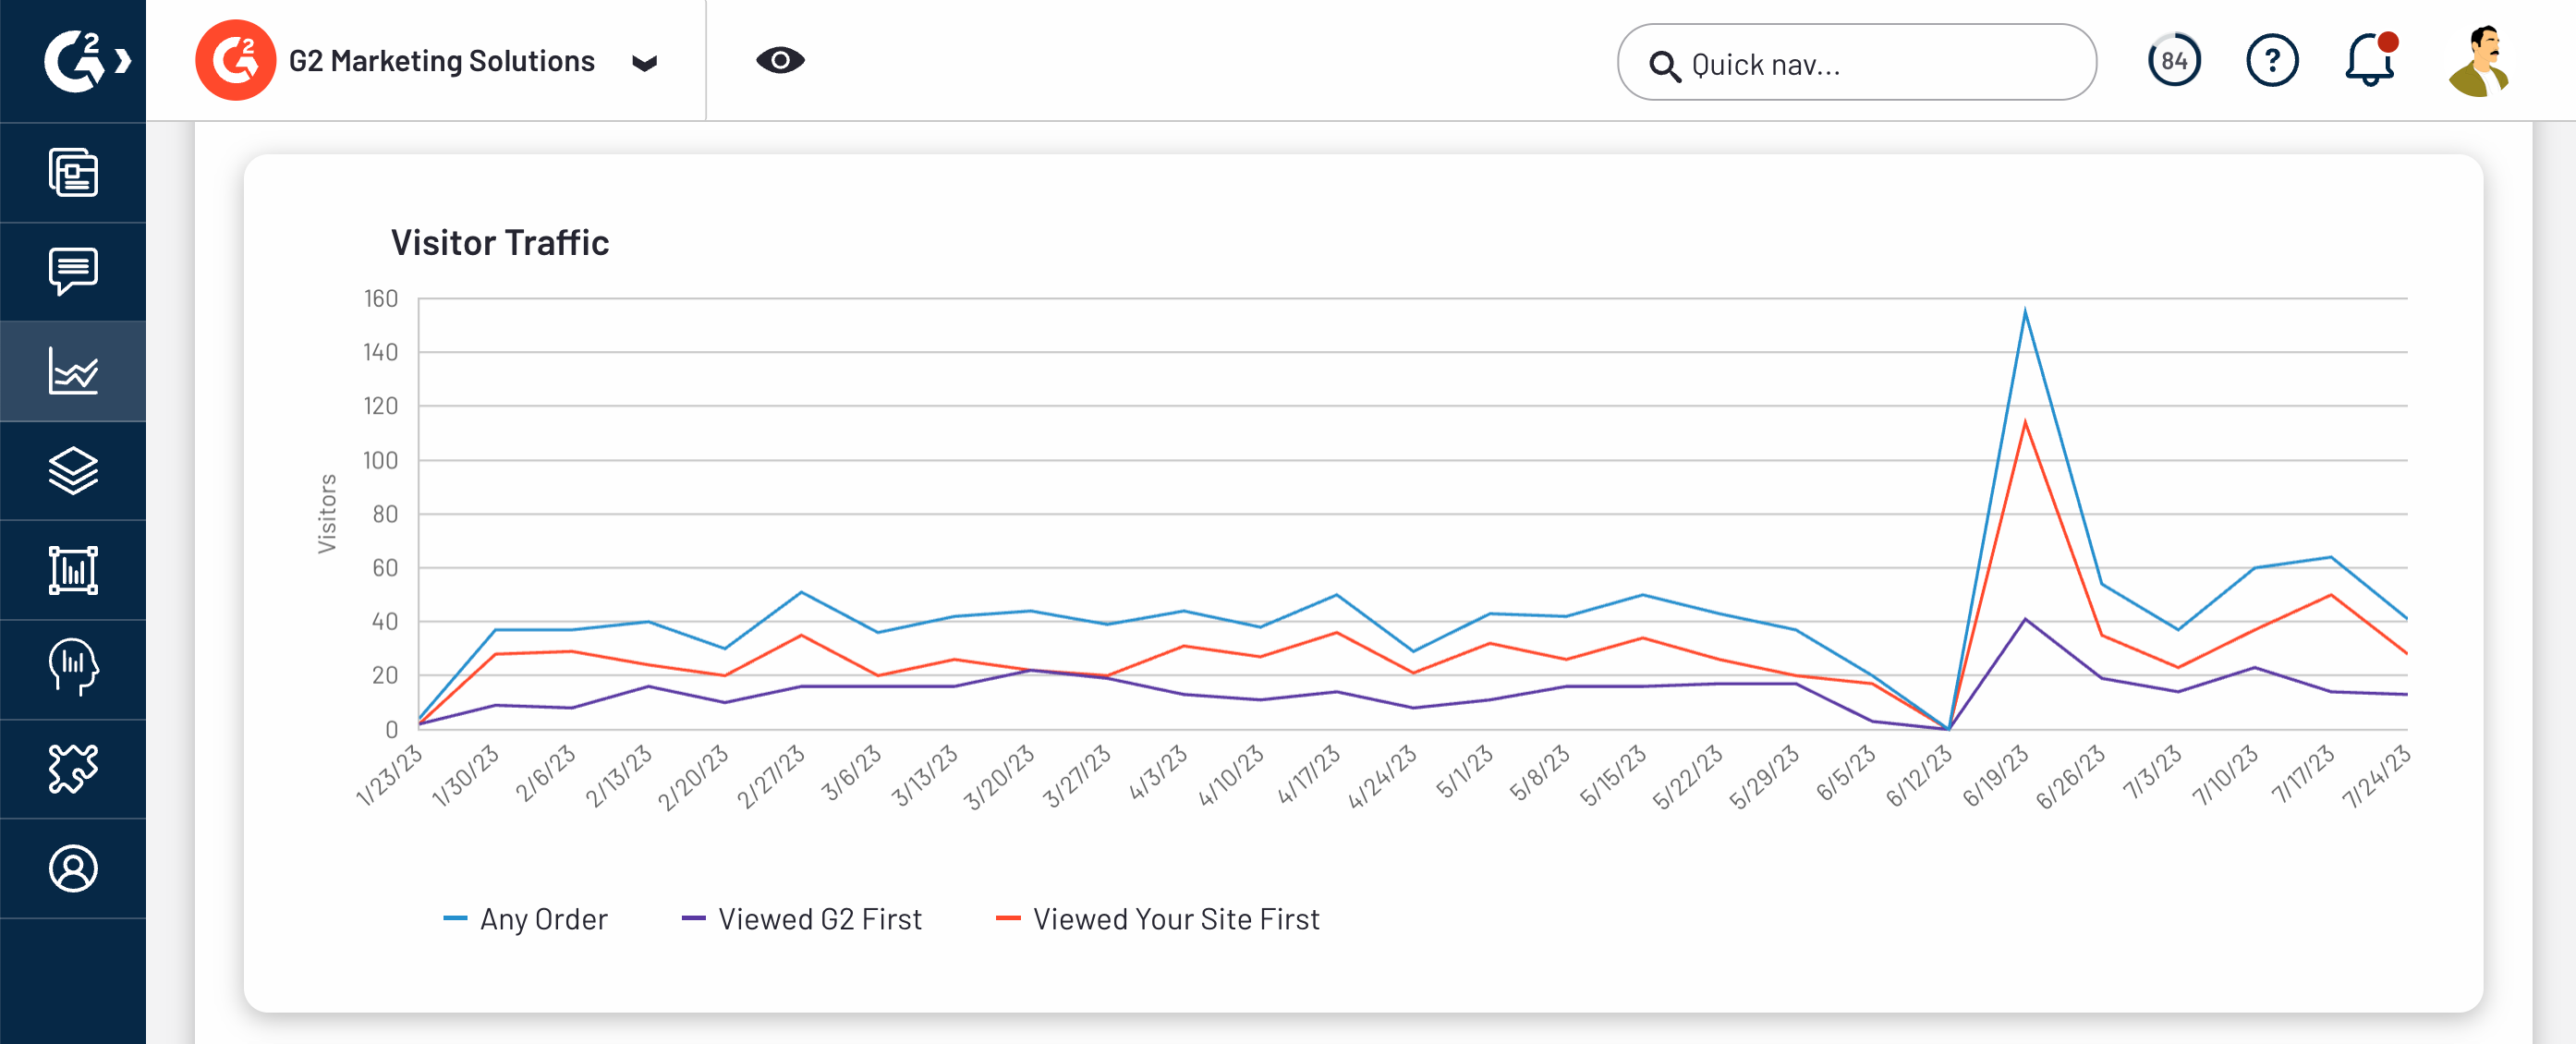 The Track Your Prospects chart shows the number of visitors over time. There are three trend lines plotted: "Any Order", "Viewed G2 First", "Viewed Your Site First"